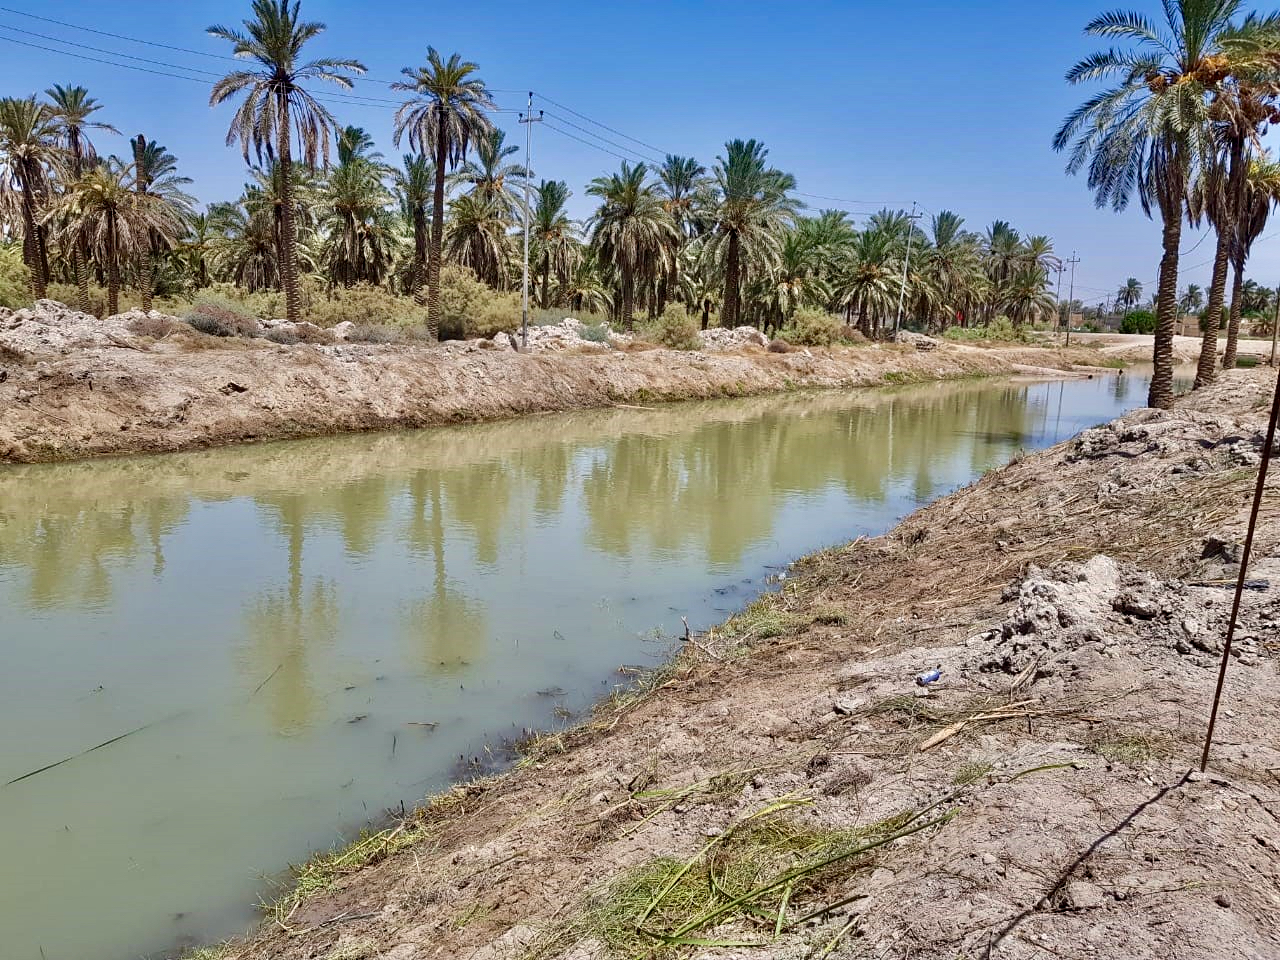 Restored irrigation canal in Thi-Qar, which participants on WFP’s resilience projects helped clear and rehabilitate, to bring water back to the community.  The projects also support vulnerable people who lost their livelihoods to earn an income during the pandemic. WFP/Photo Library